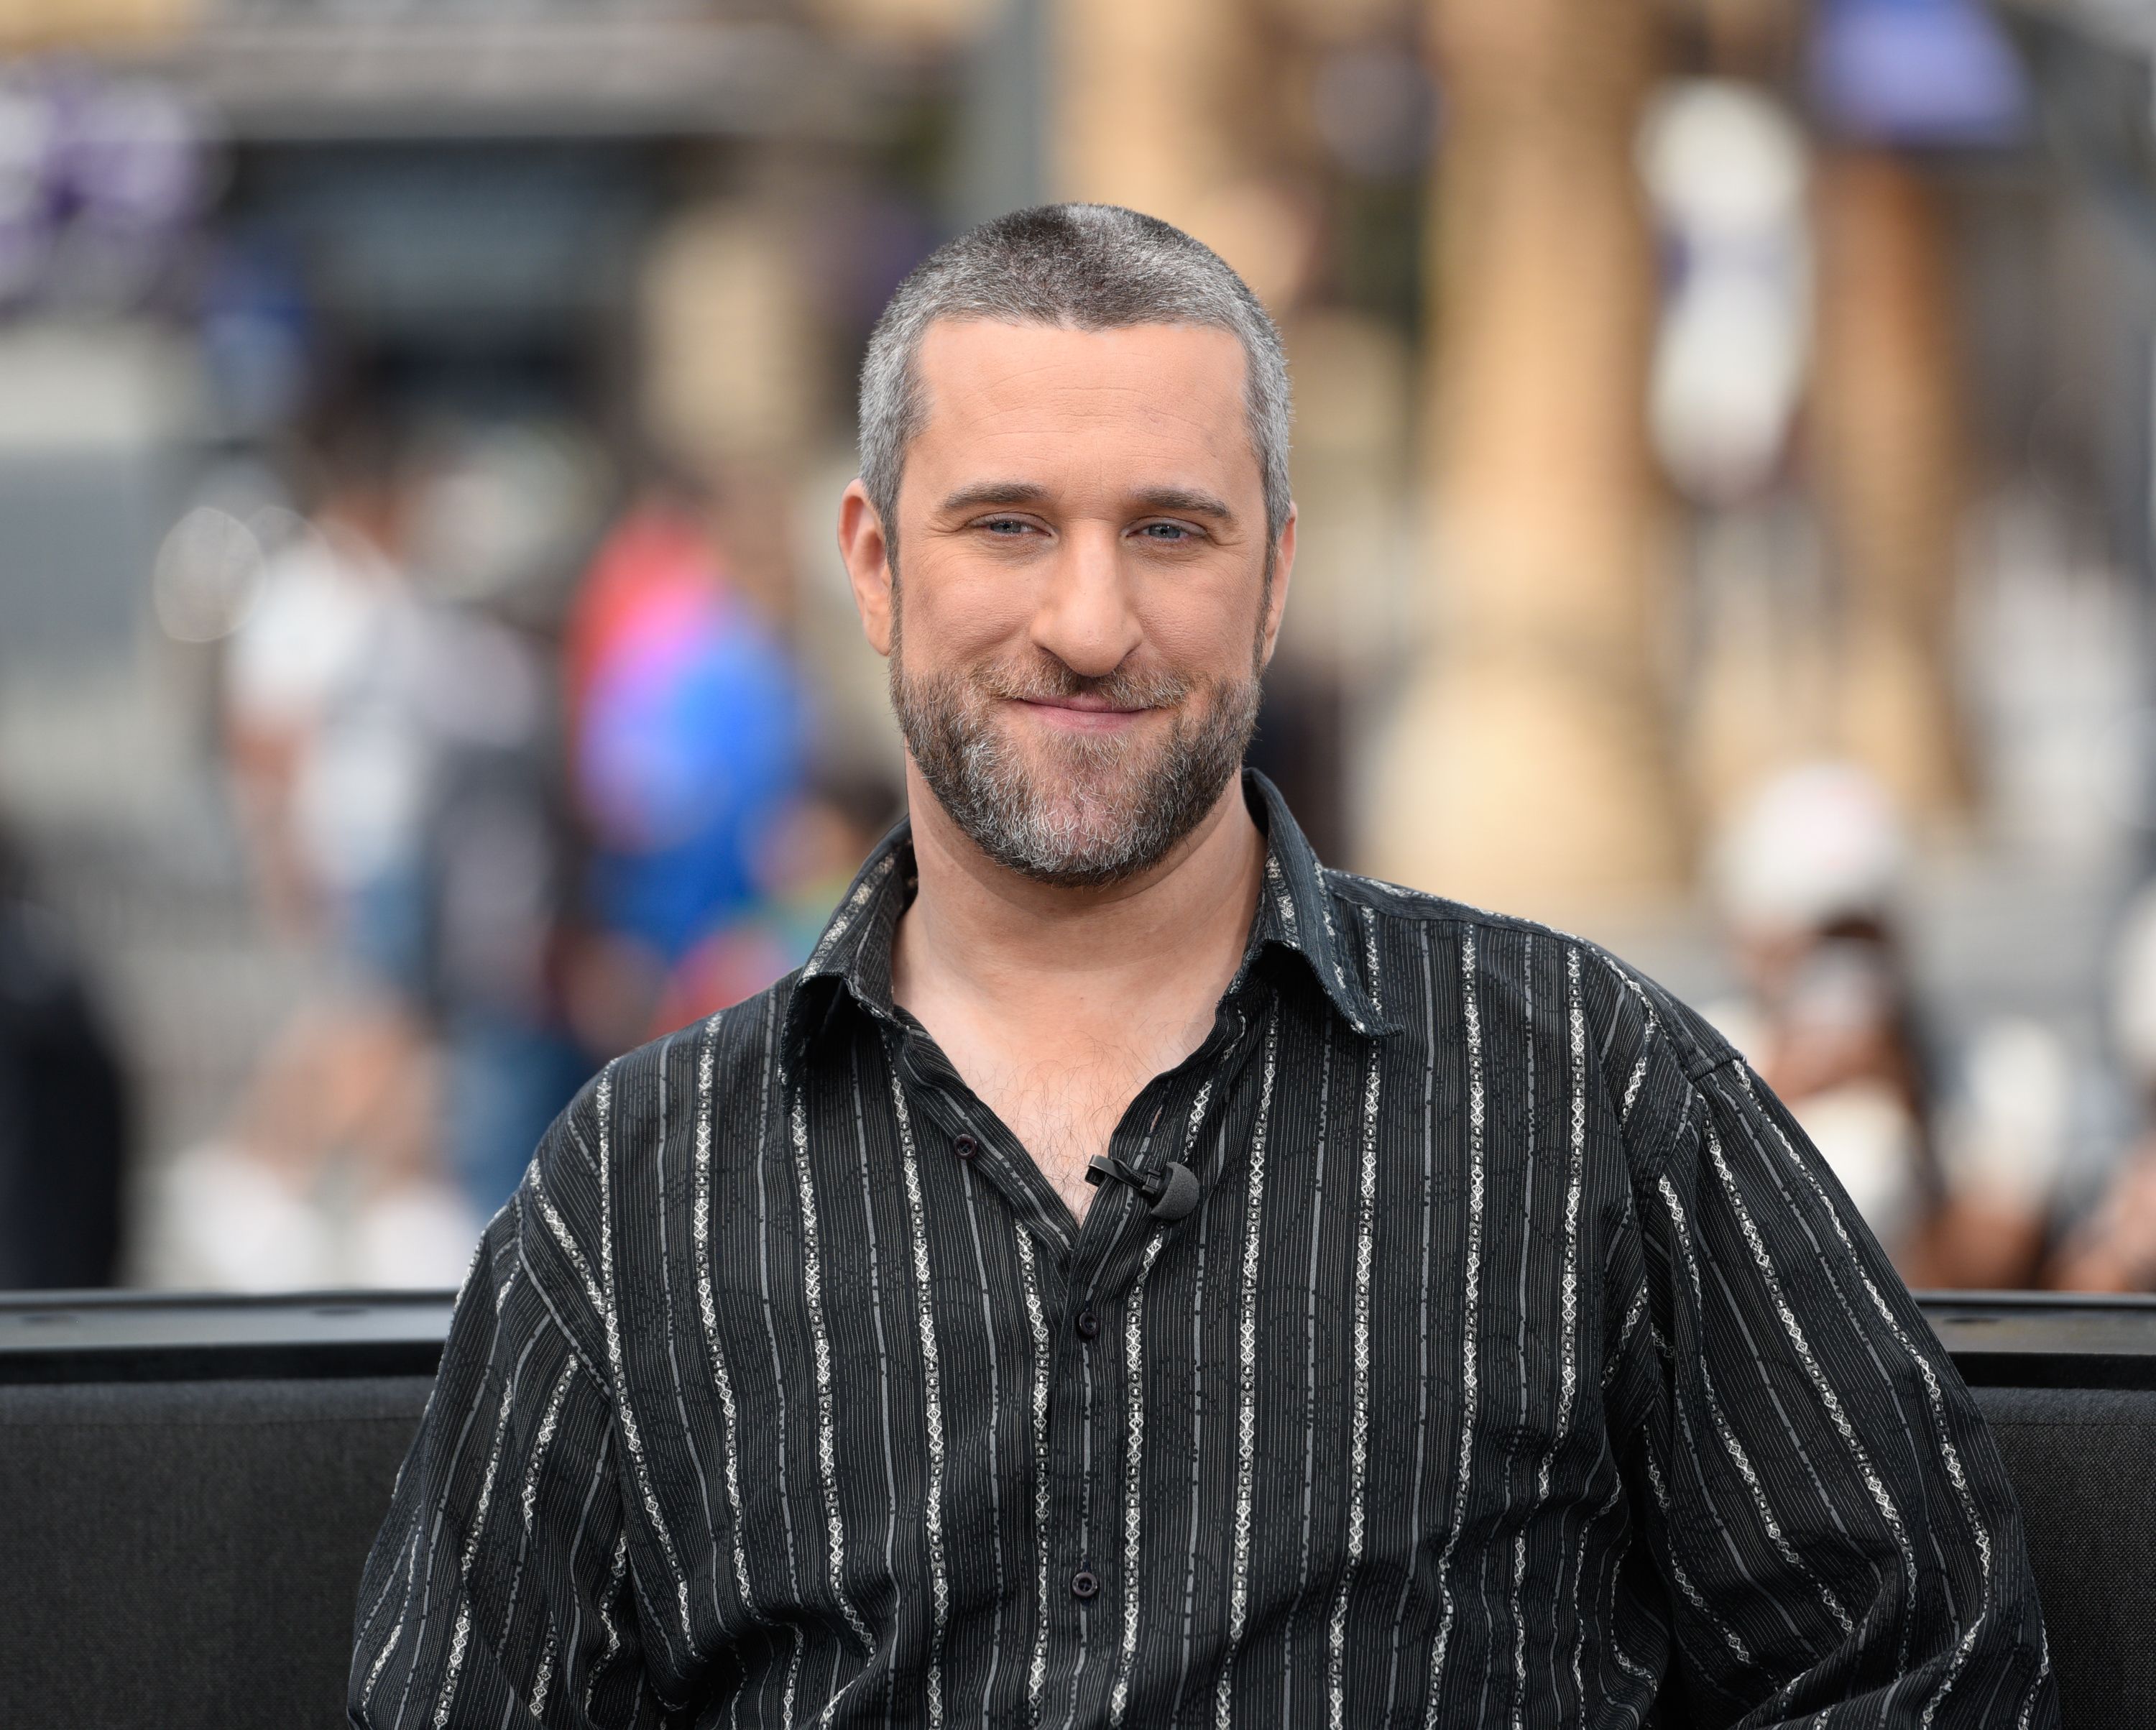 Dustin Diamond visits "Extra" at Universal Studios Hollywood on May 16, 2016 | Photo: Getty Images